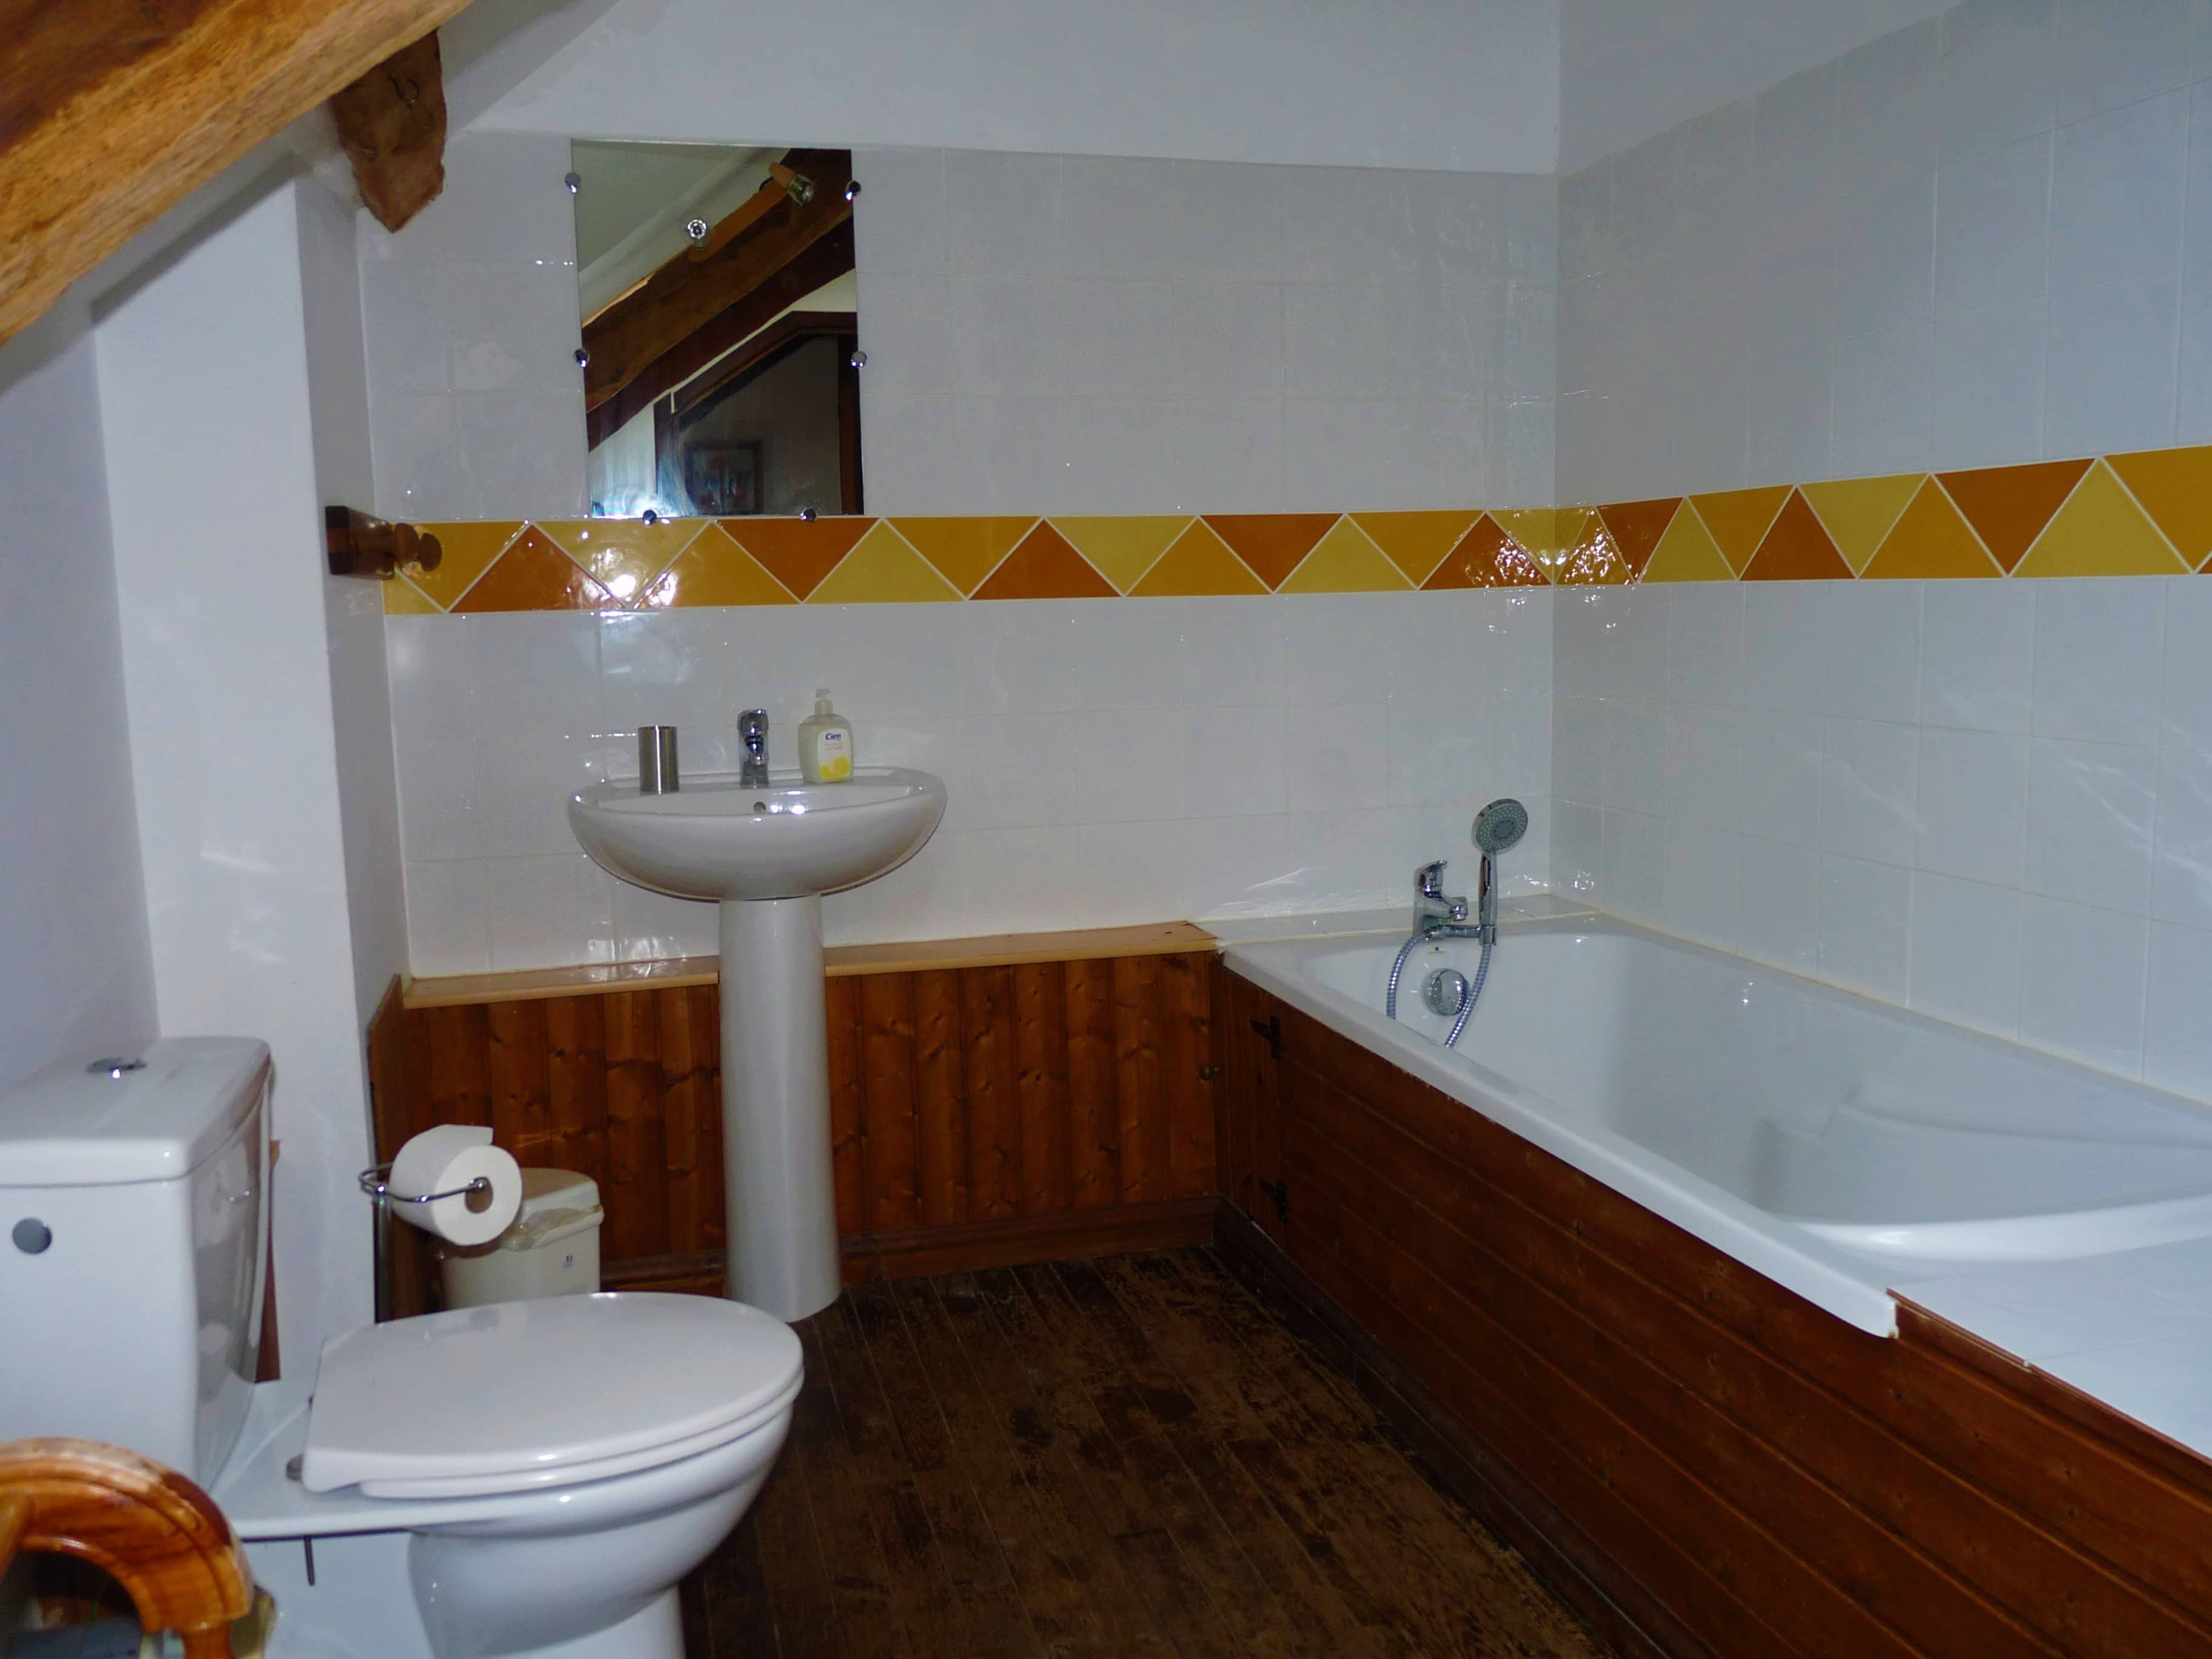 Modern and elegant bathroom of La Julerie cottage in Brittany, France, with a walk-in shower, mosaic tiles, and high-end amenities. Ideal for freshening up after a day of sightseeing in Brittany.